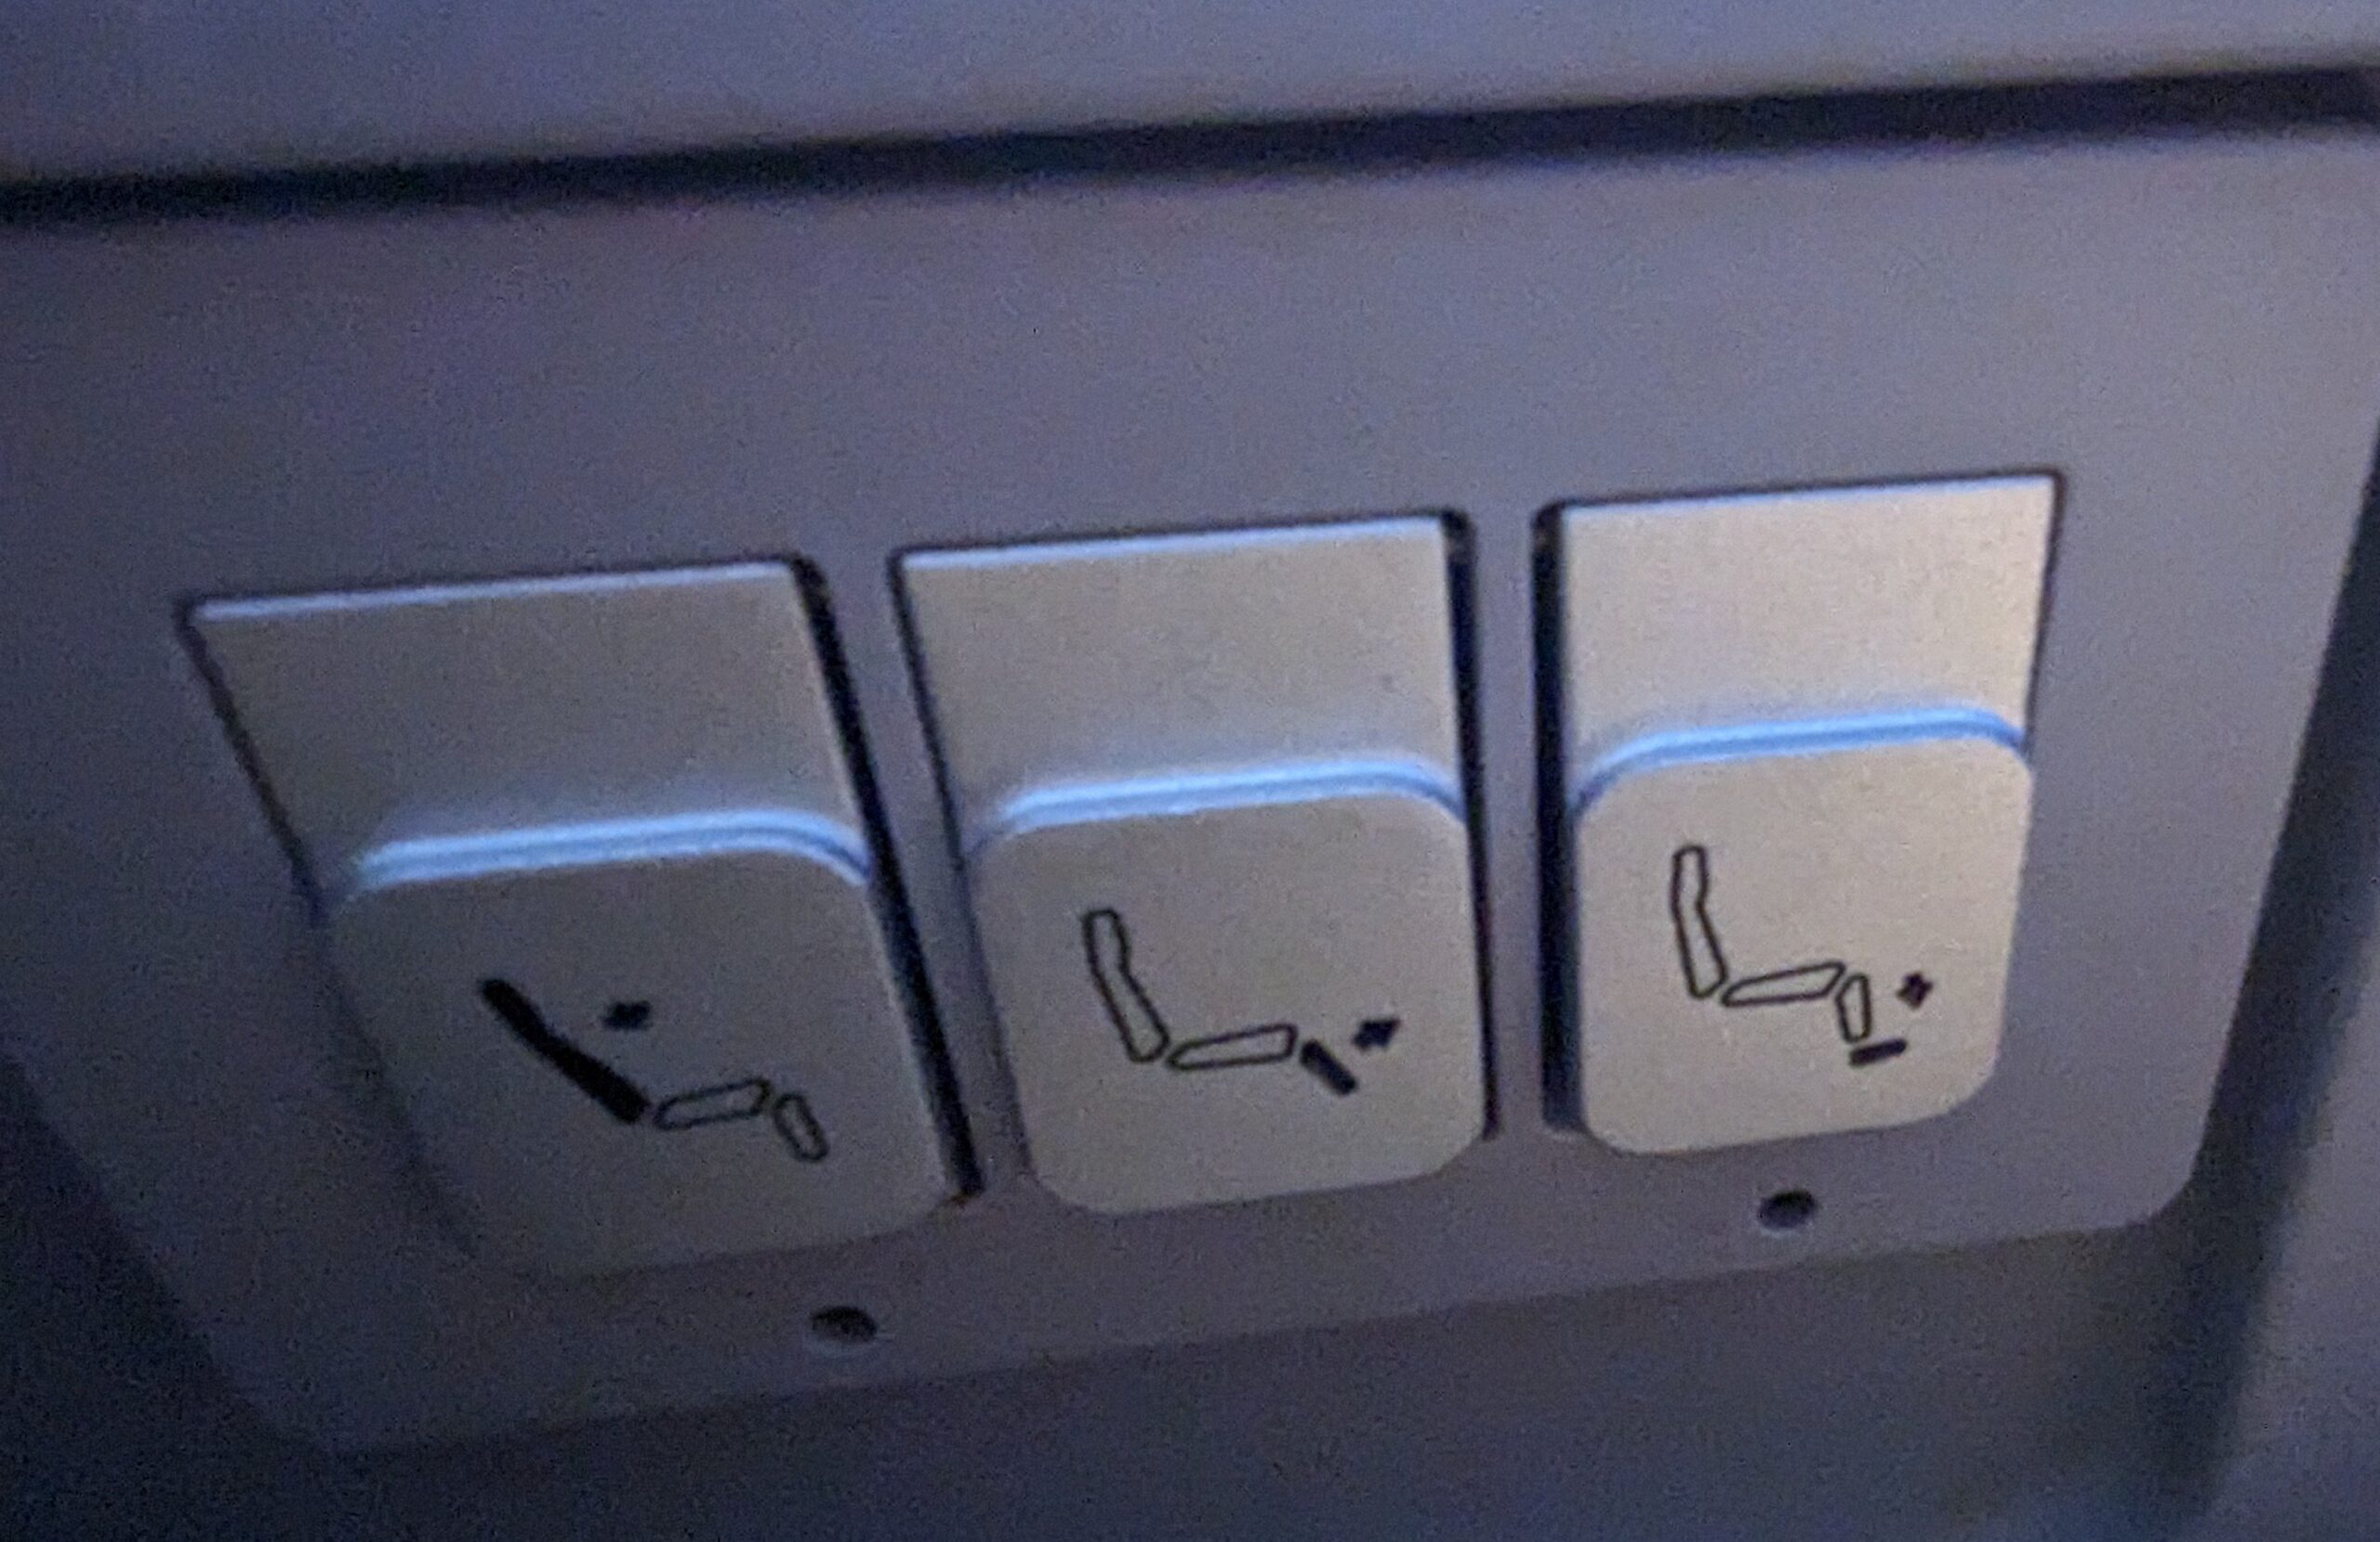 a close up of a seat buttons